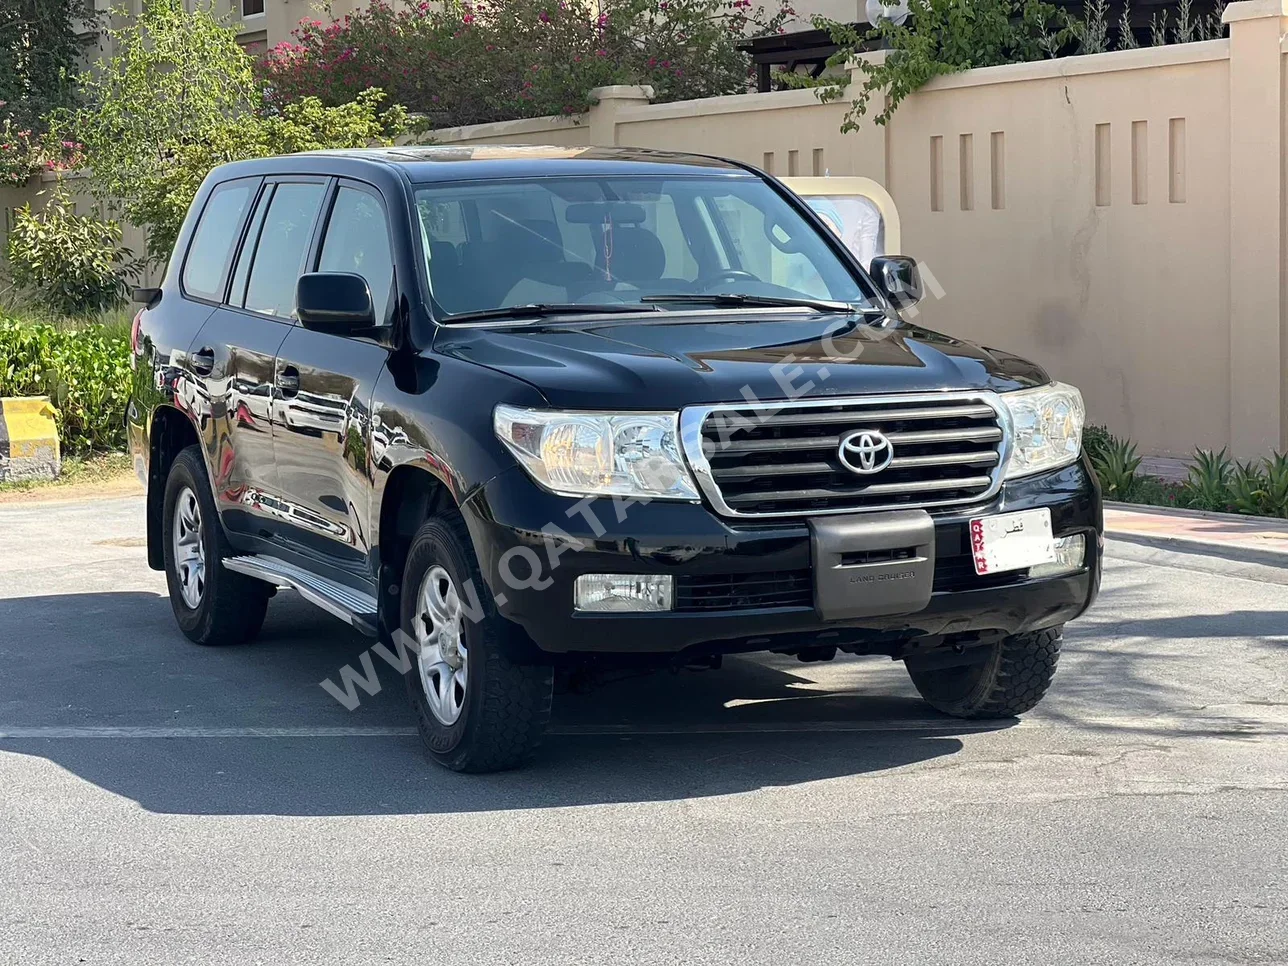 Toyota  Land Cruiser  G Limited  2009  Automatic  250,000 Km  6 Cylinder  Four Wheel Drive (4WD)  SUV  Black